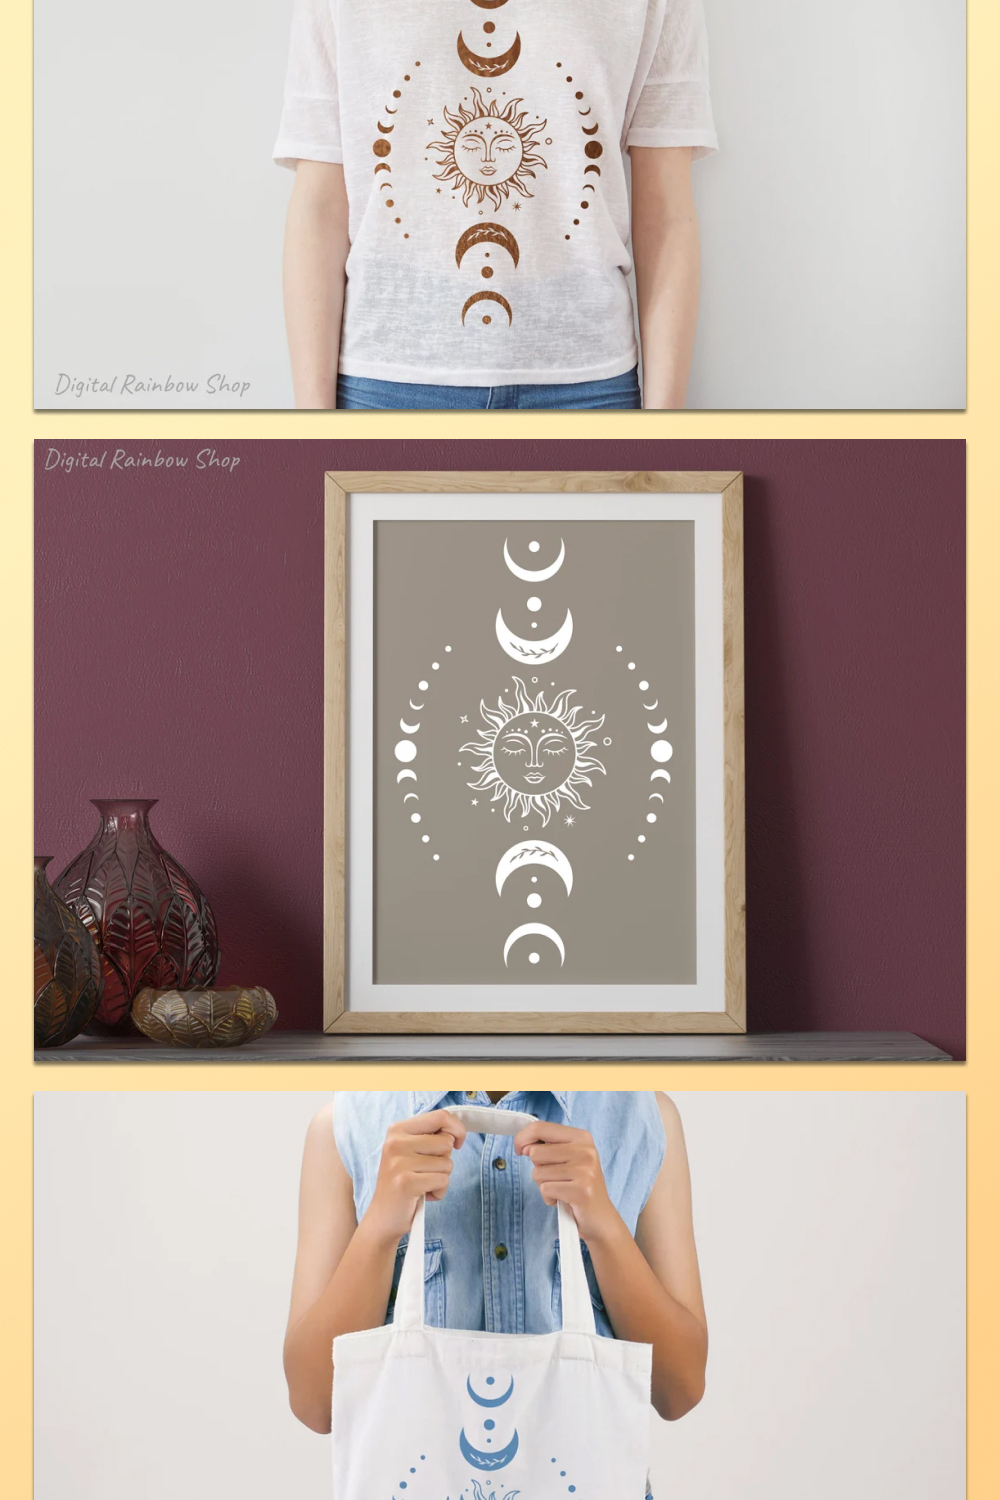 Lunar style on prints, paintings and more.